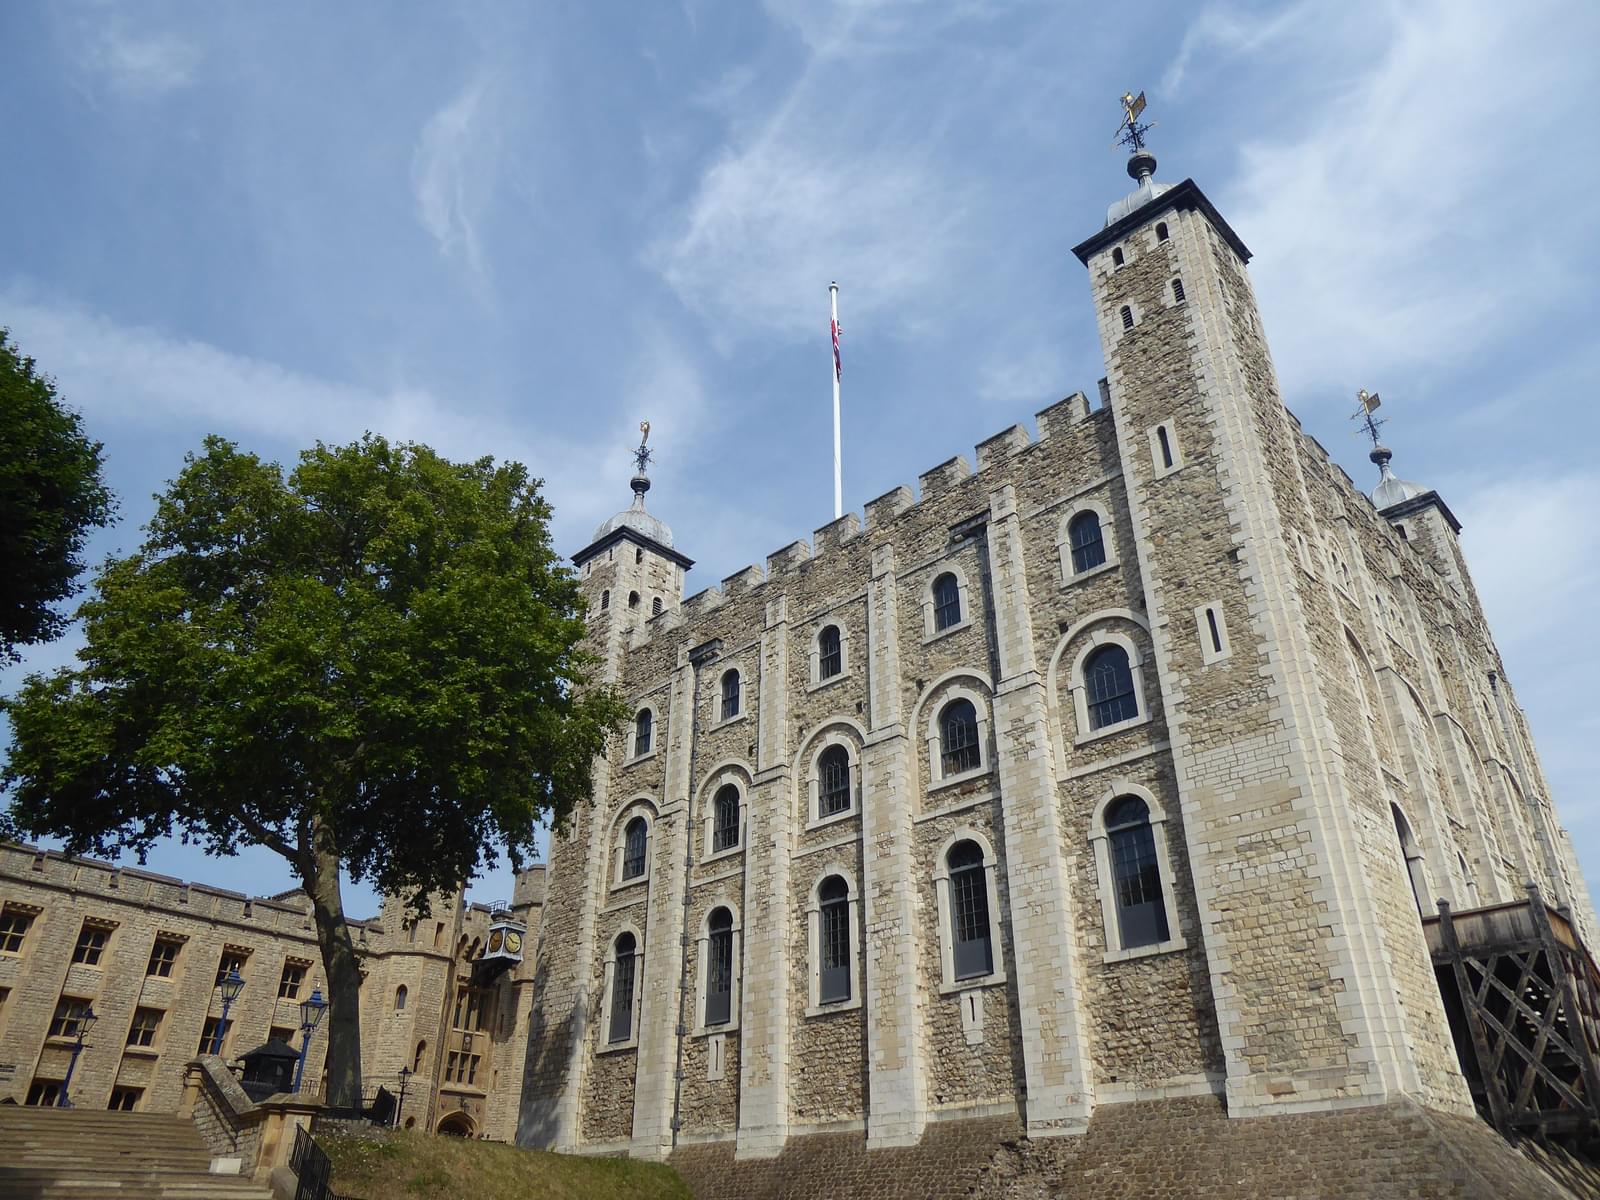 Explore The White Tower